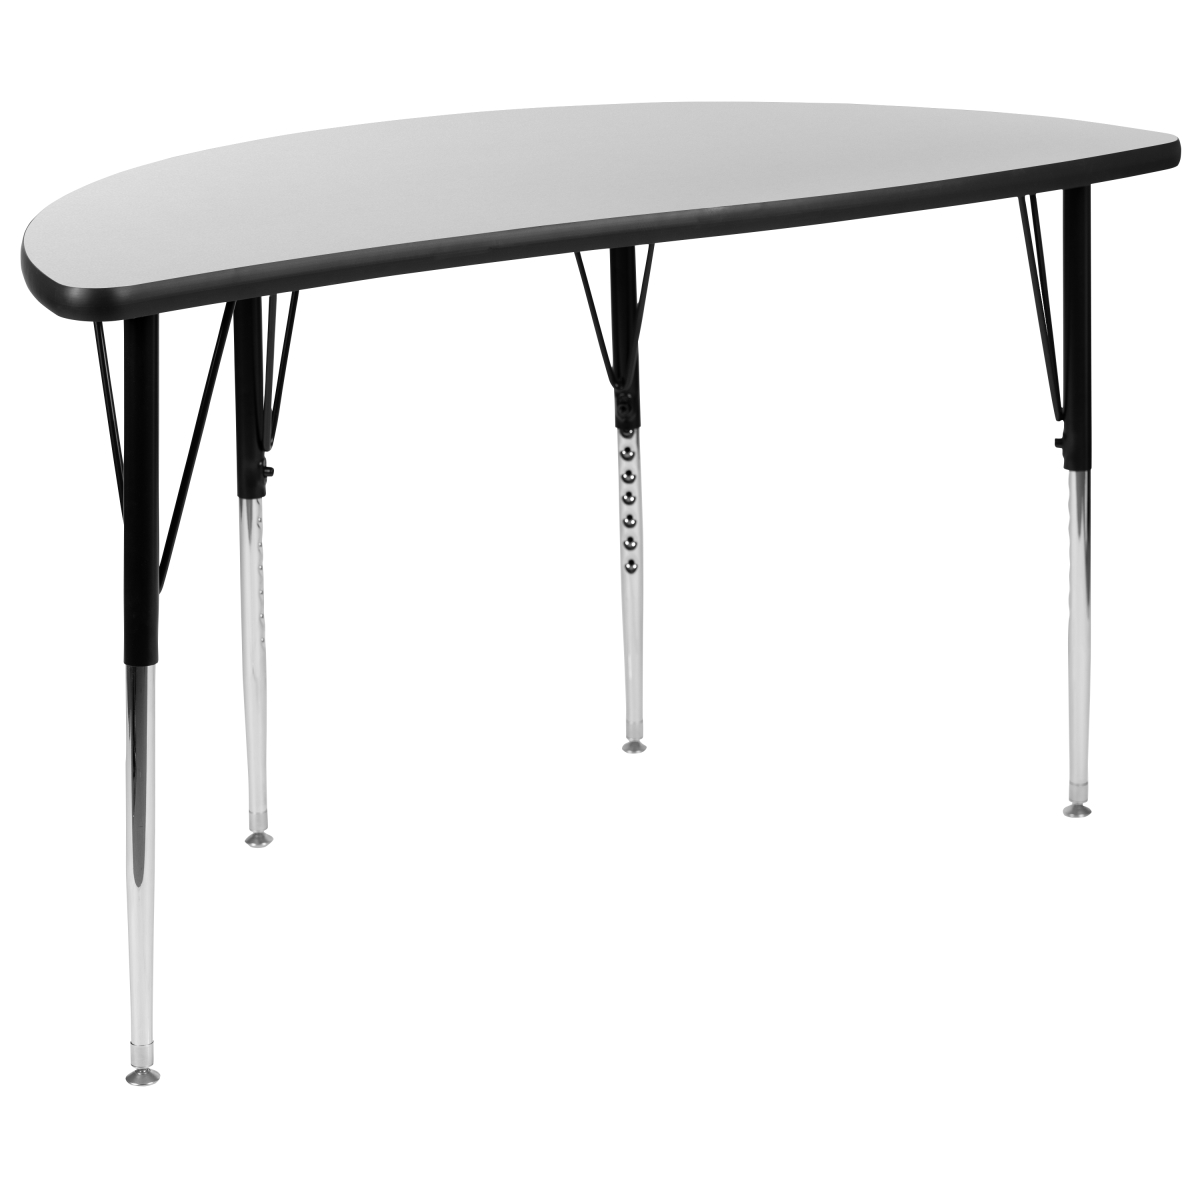 Picture of Flash Furniture XU-A48-HCIRC-GY-T-A-GG 47.5 in. Half Circle Wave Flexible Collaborative Grey Thermal Laminate Activity Table - Standard Height Adjustable Legs